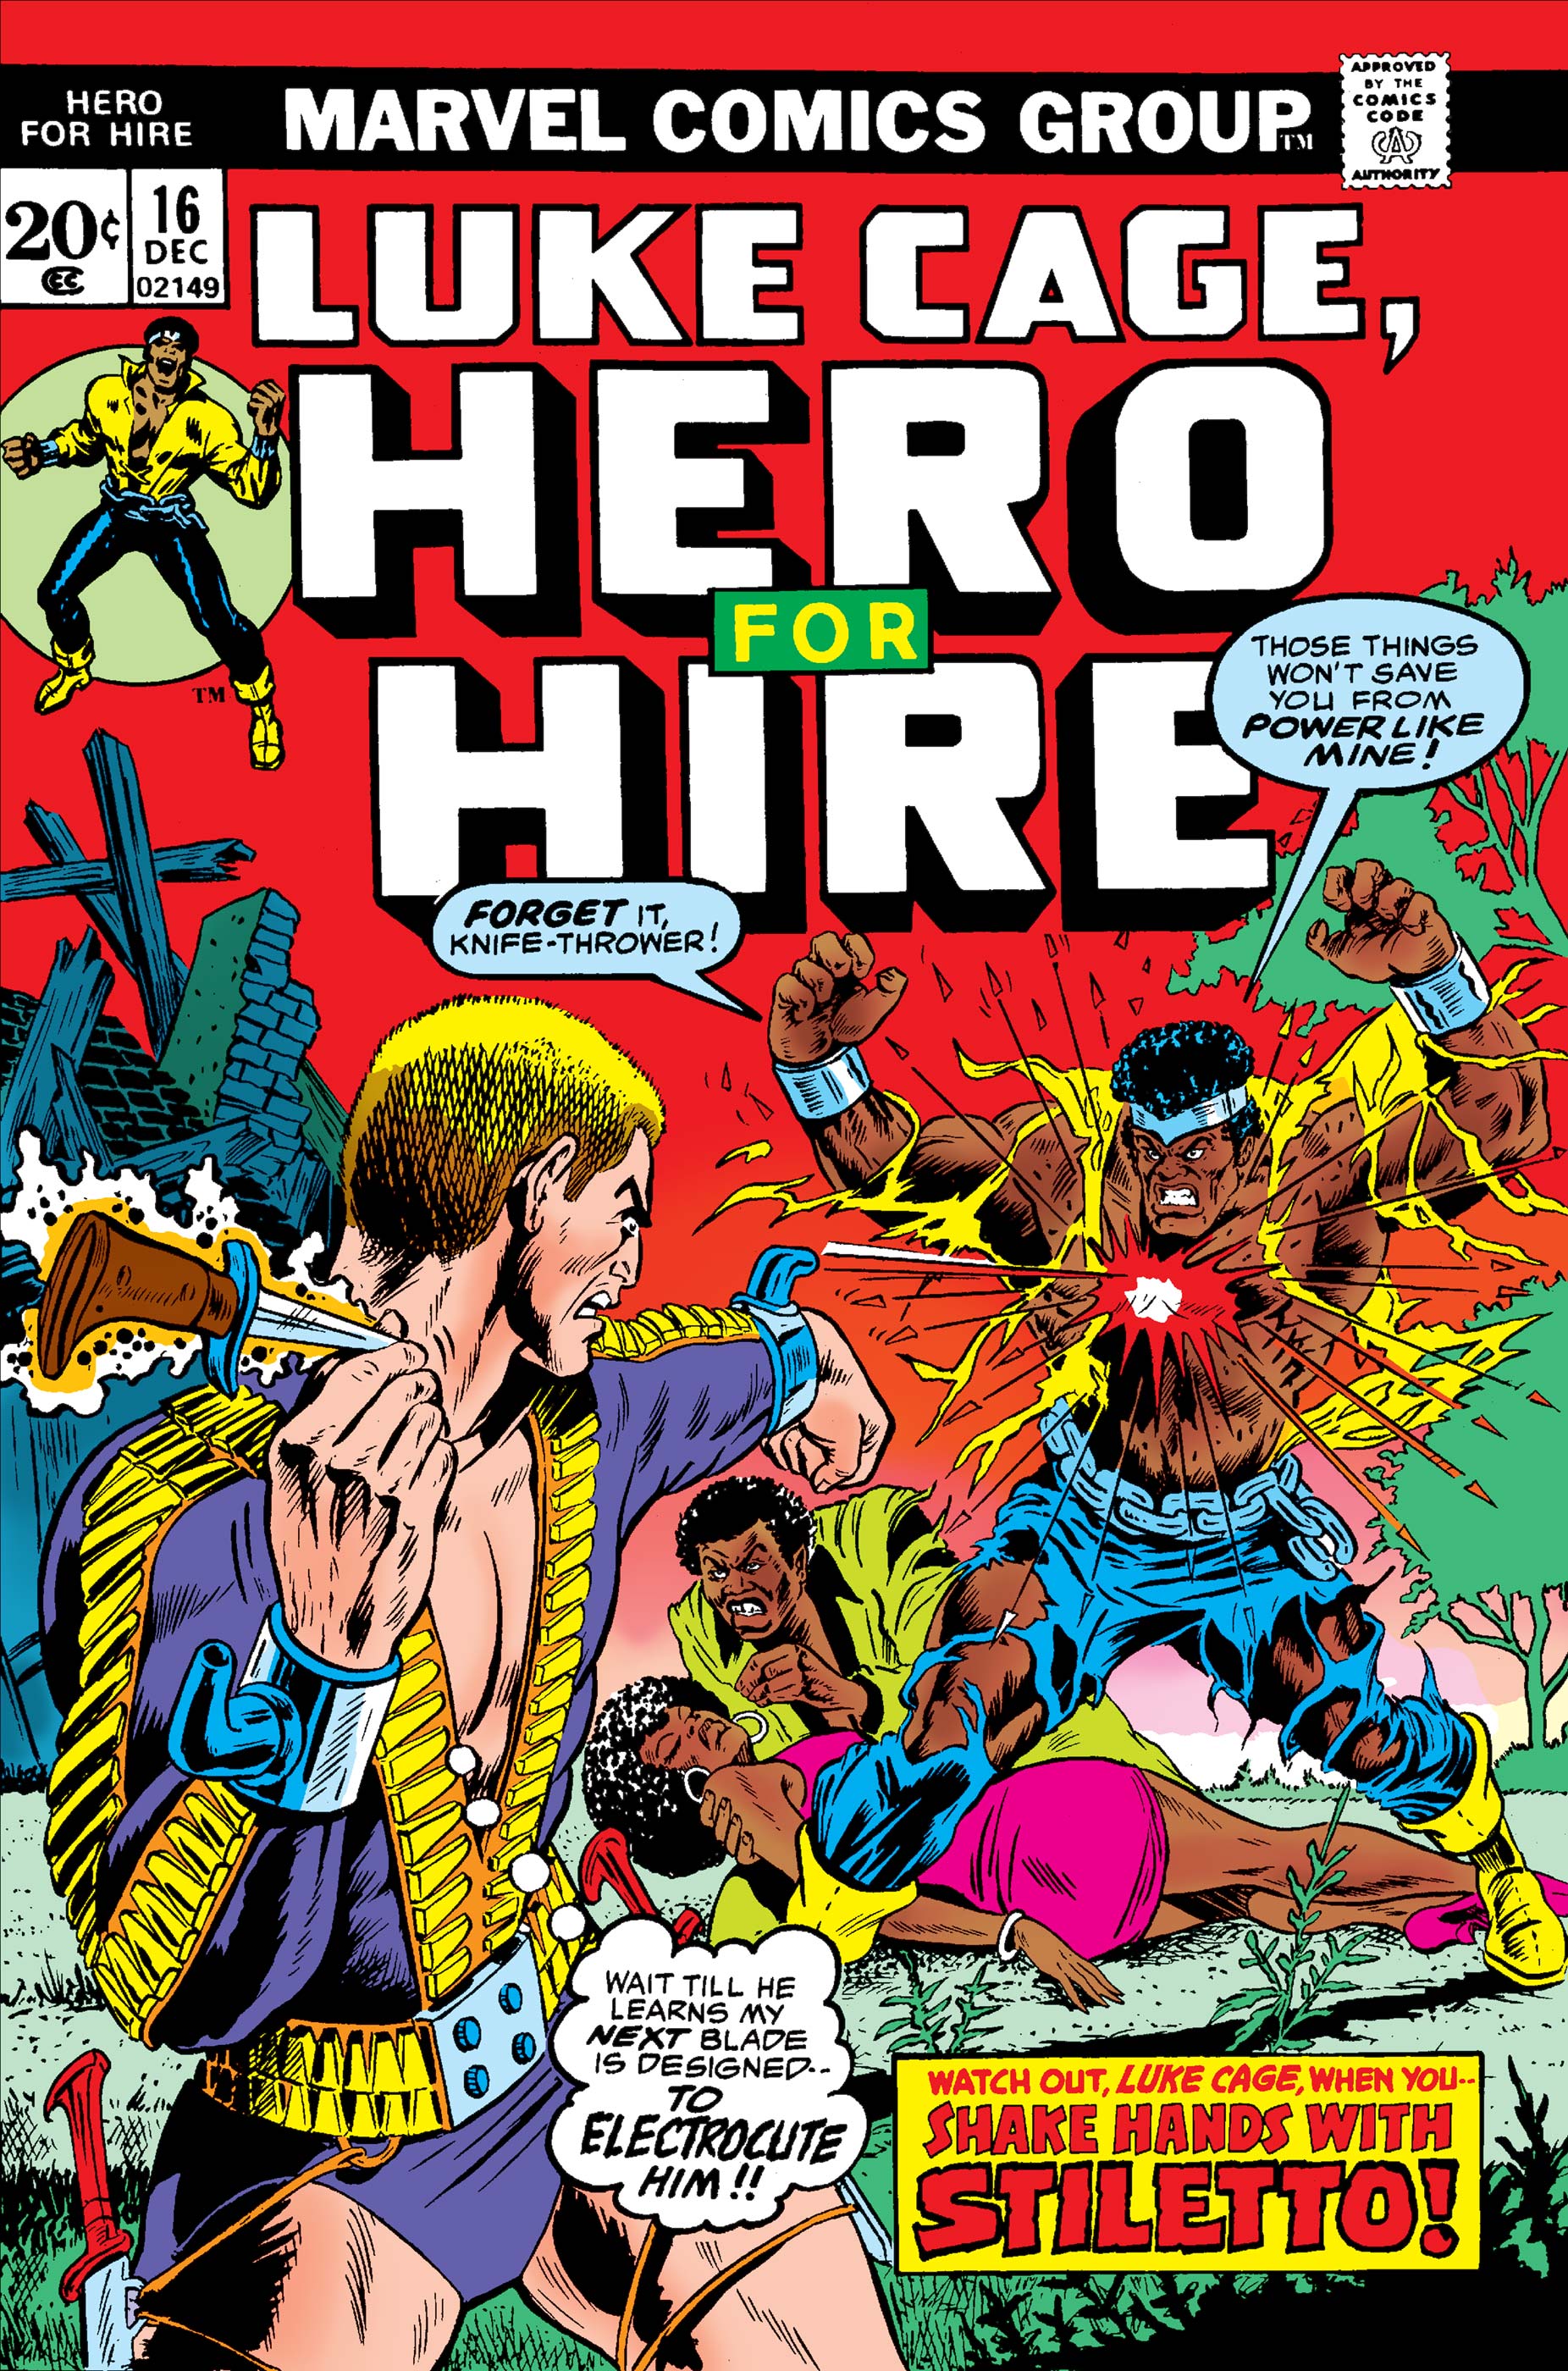 Hero for Hire (1972) #16